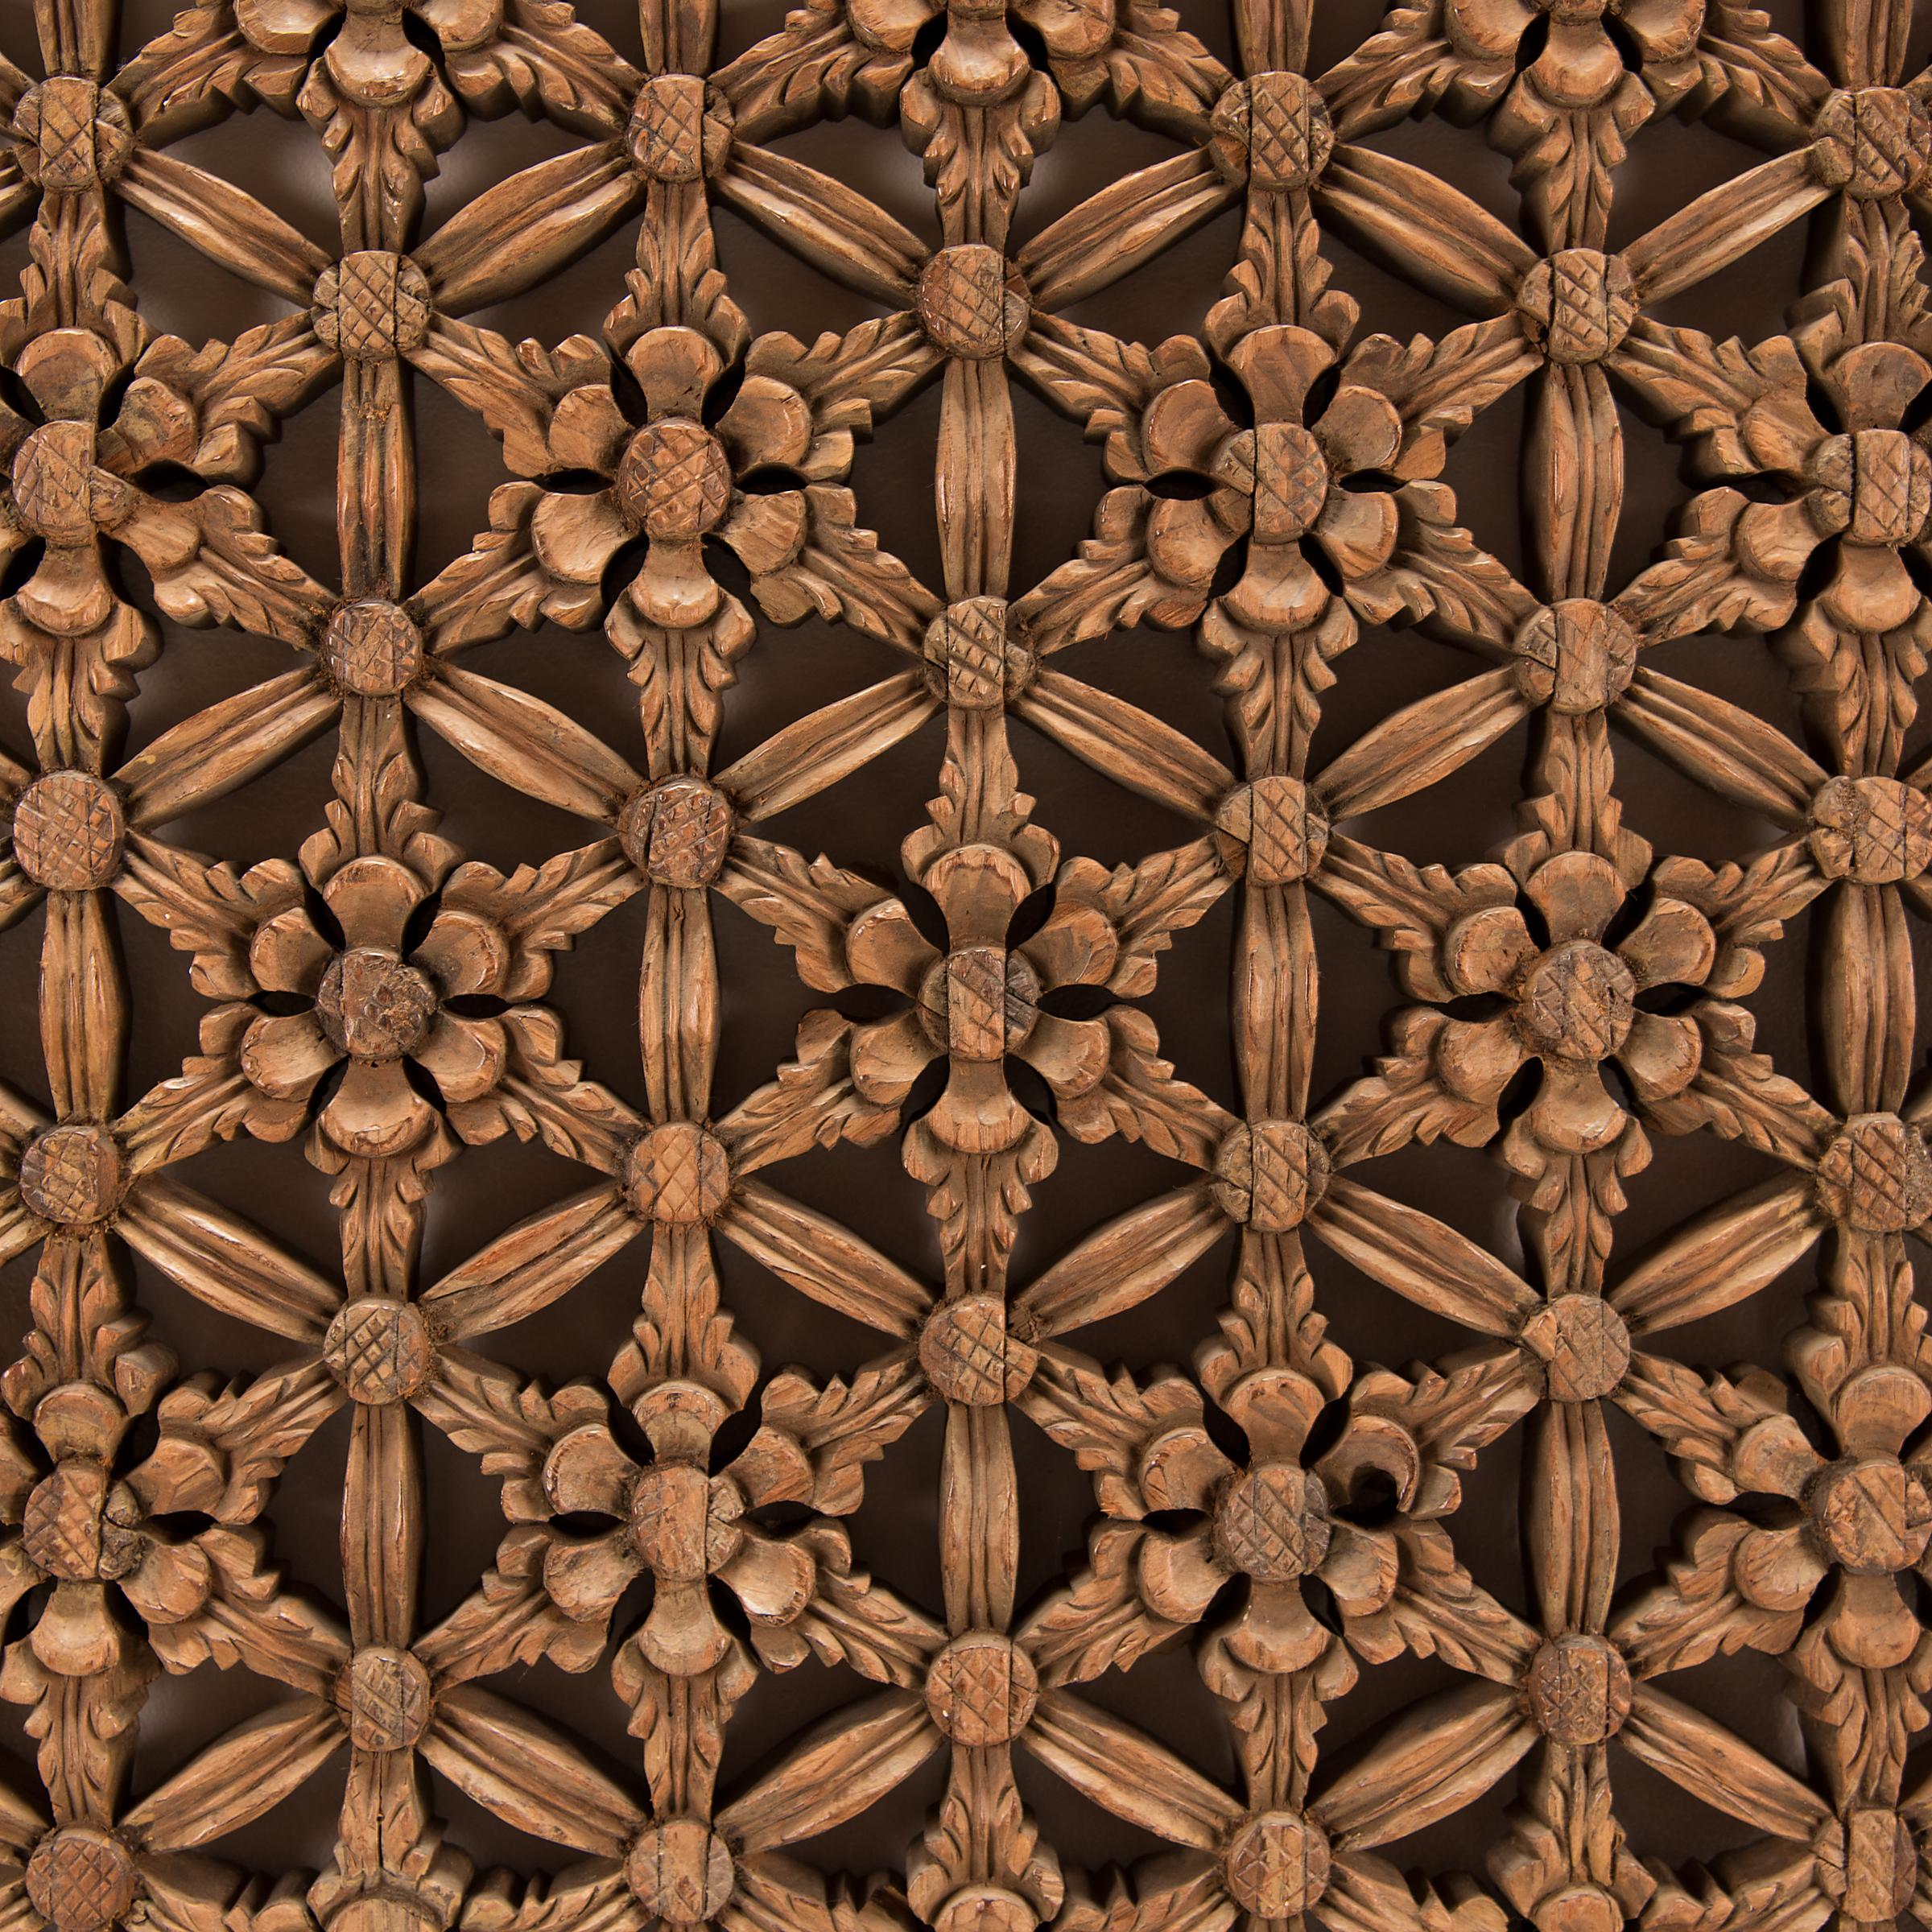 This lattice window panel likely originated in an aristocratic Chinese home with neutral and balanced interiors. The intricate latticework was designed to allow light and air into a room while maintaining privacy. Creating lattice was a puzzling